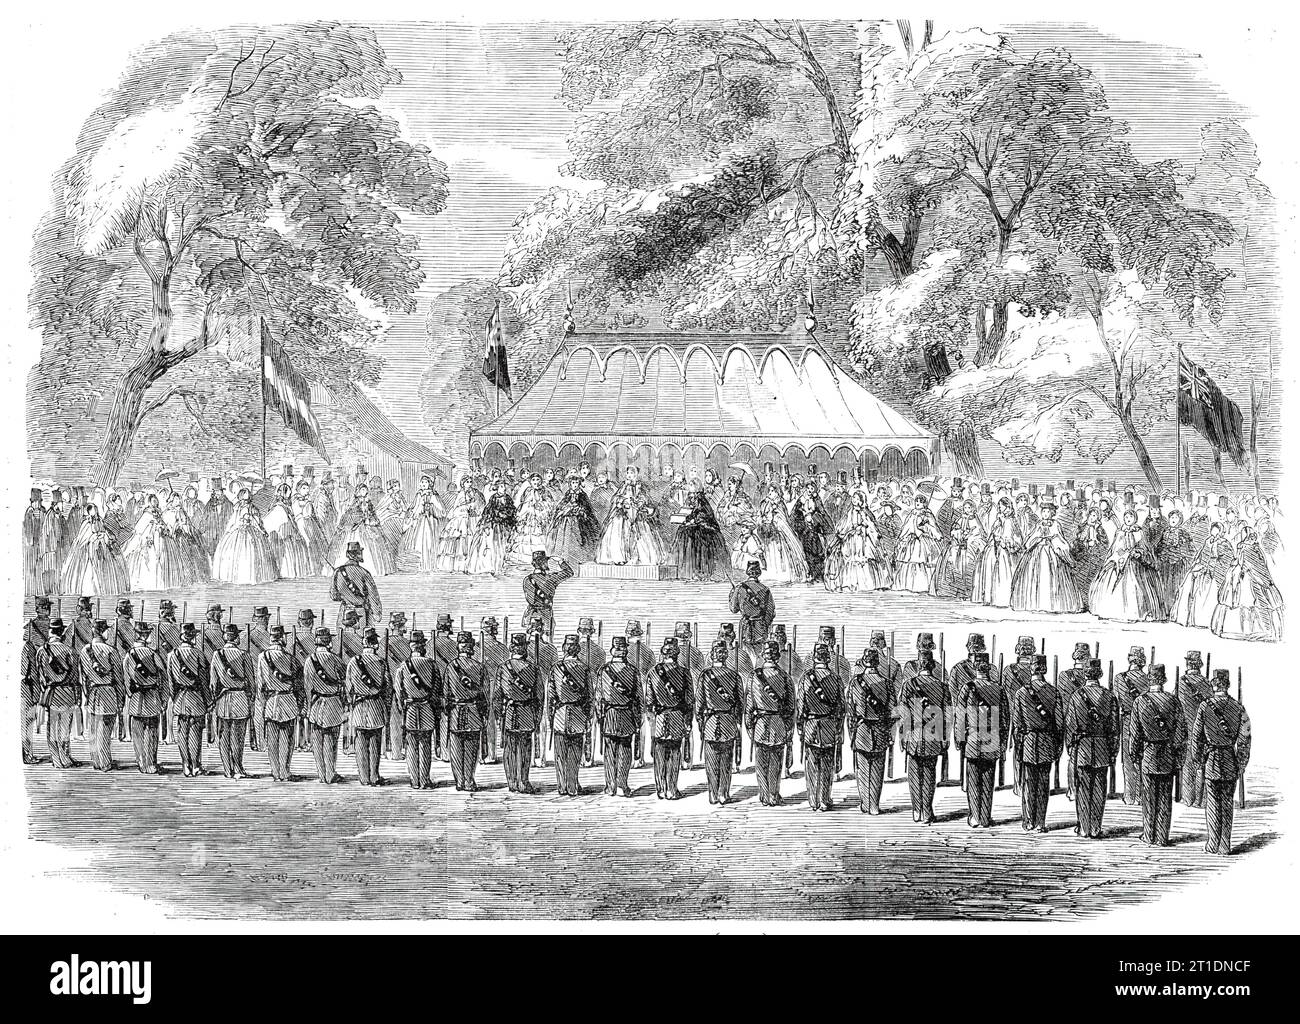 Presentation of a silver bugle by Lady Duff Gordon to the 6th Surrey (Esher) Volunteer Rifle Corps, 1860. 'The speech of her Ladyship was as follows: &quot;Captain Sir Henry Fletcher, Officers, and Men of the 6th Surrey Rifle Volunteers - the ladies of Esher and the neighbourhood have desired me to present to your corps a silver bugle subscribed for by them. We earnestly hope that it may never sound but for your training in those martial exercises by which you are qualifying yourselves to act as our defenders. But if the day should come when its notes must ring on a field of battle, I assure y Stock Photo